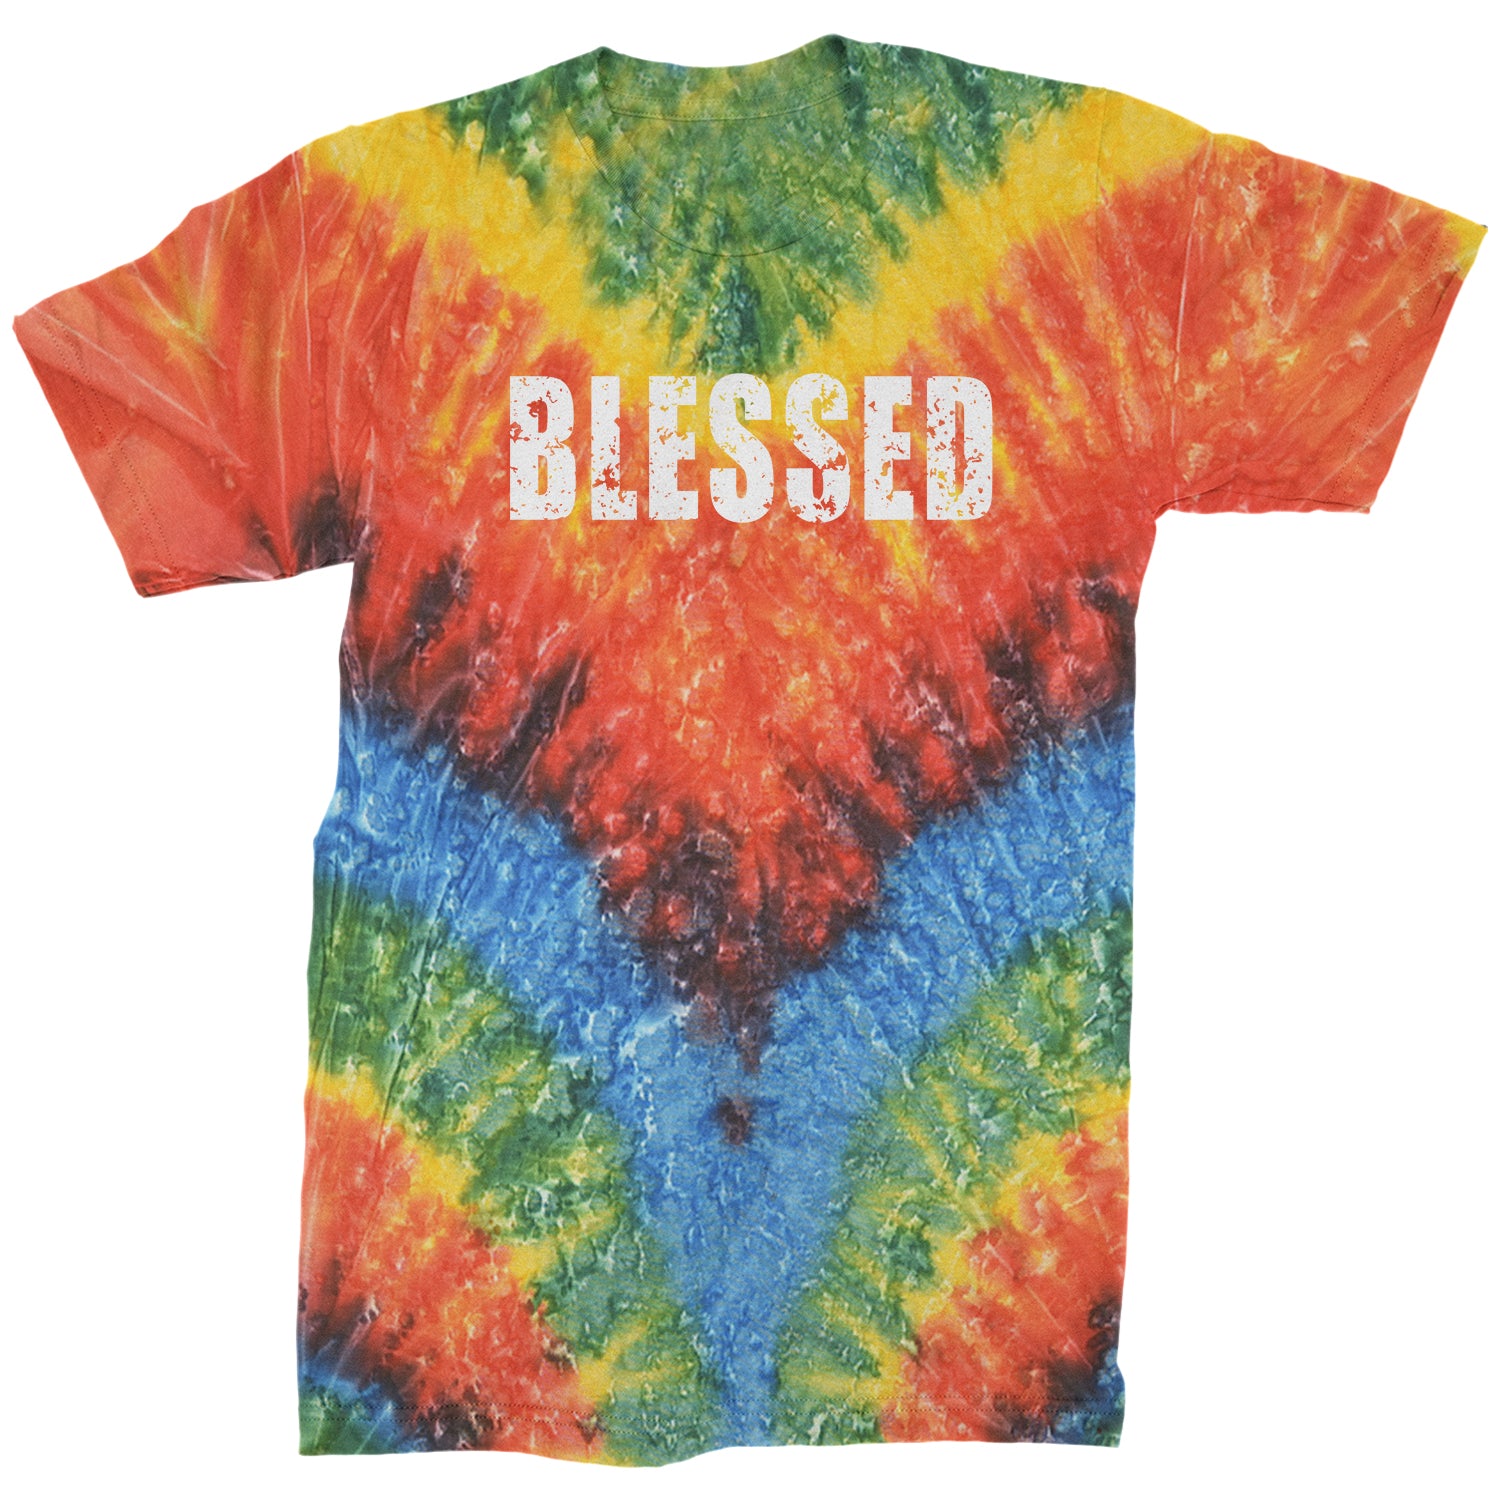 Blessed Religious Grateful Thankful Mens T-shirt #expressiontees by Expression Tees